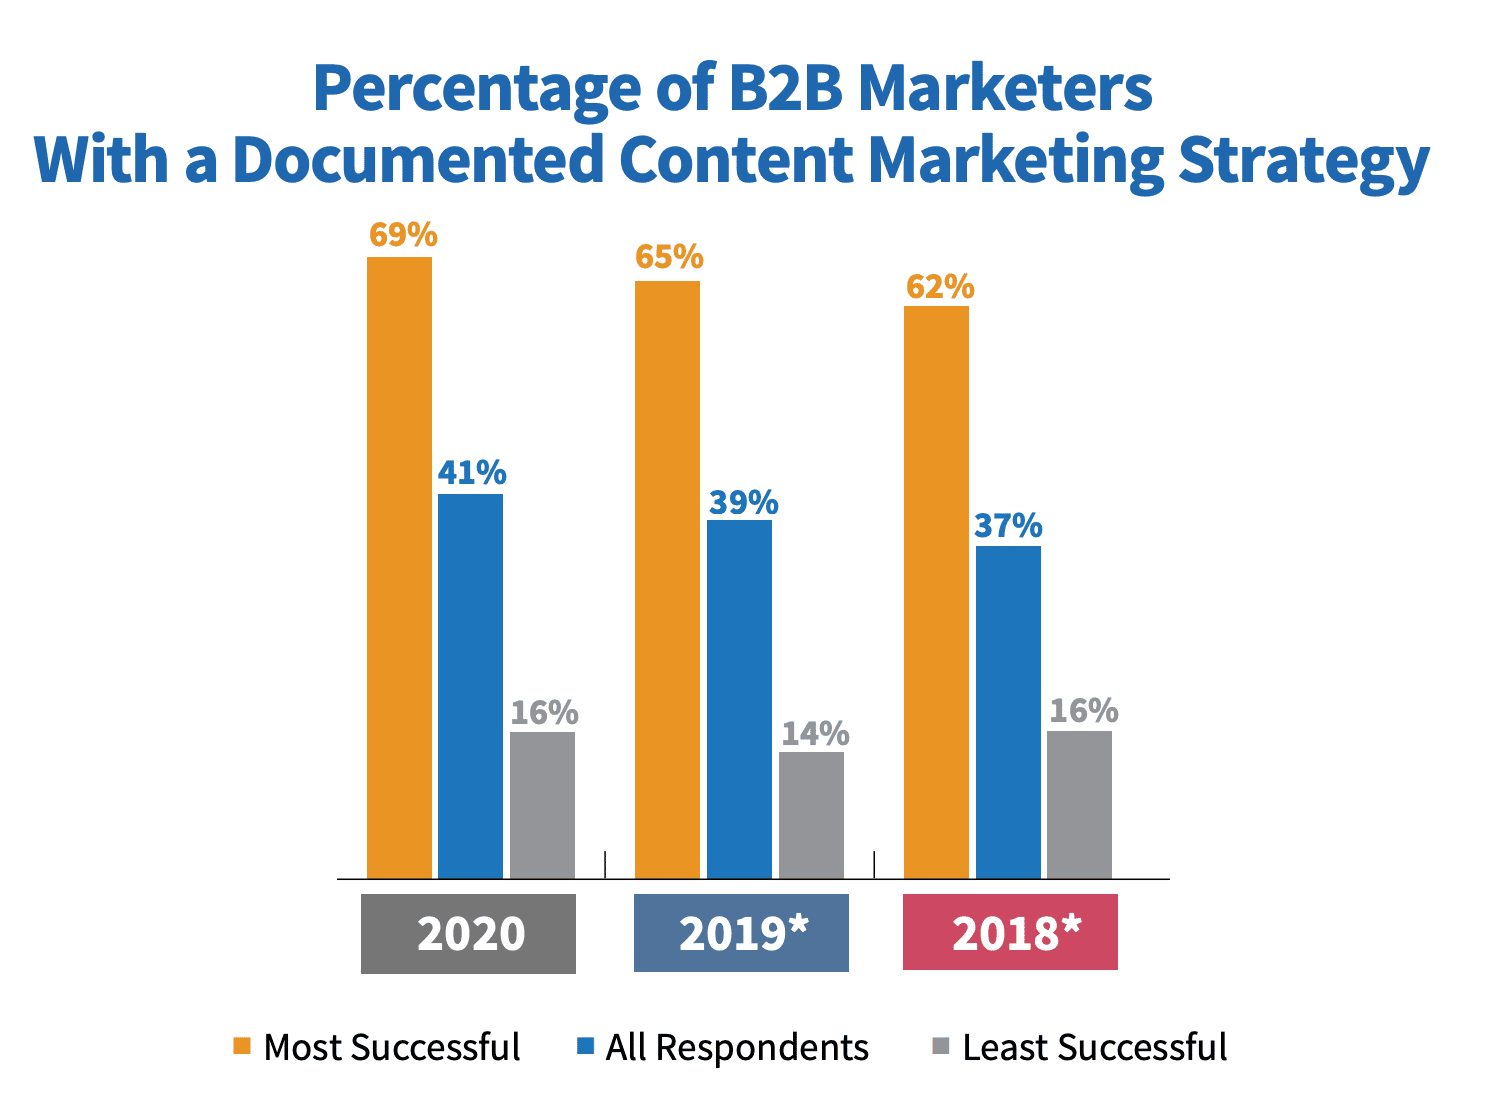 bar graph shows that 69% of the most successful B2B marketers have a documented content marketing strategy